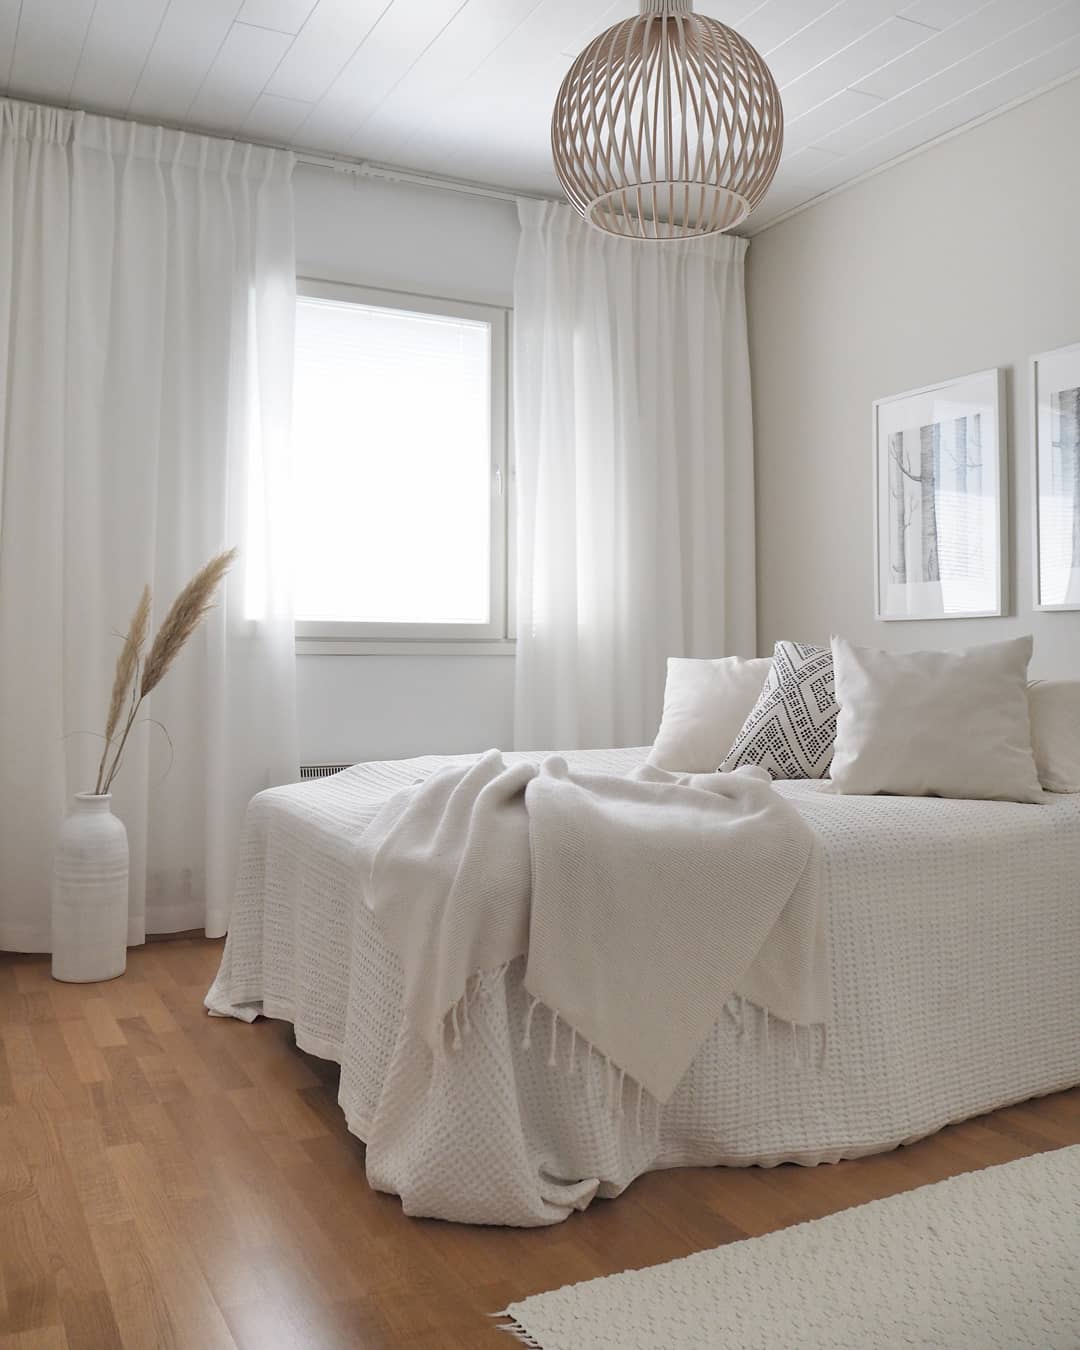 Mimimalist Bedroom with White Bedding and Simple White Curtains. Photo by Instagram user @homebykoskela